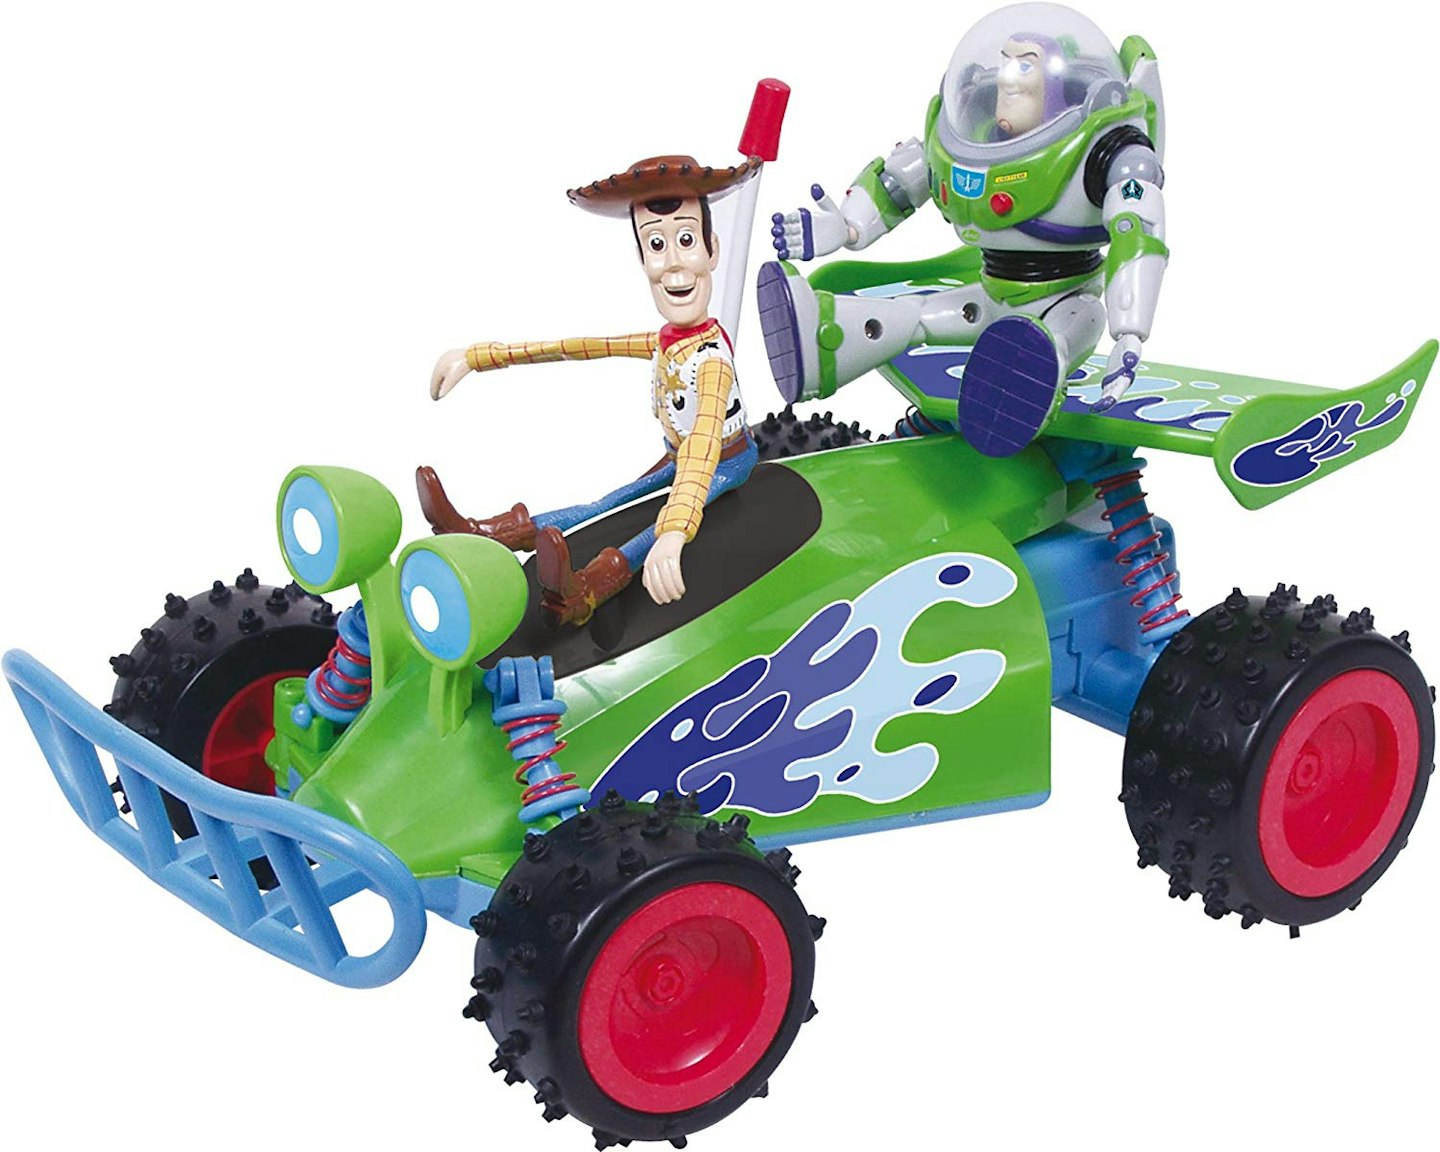 Toy Story Radio Controlled RC, £29.99